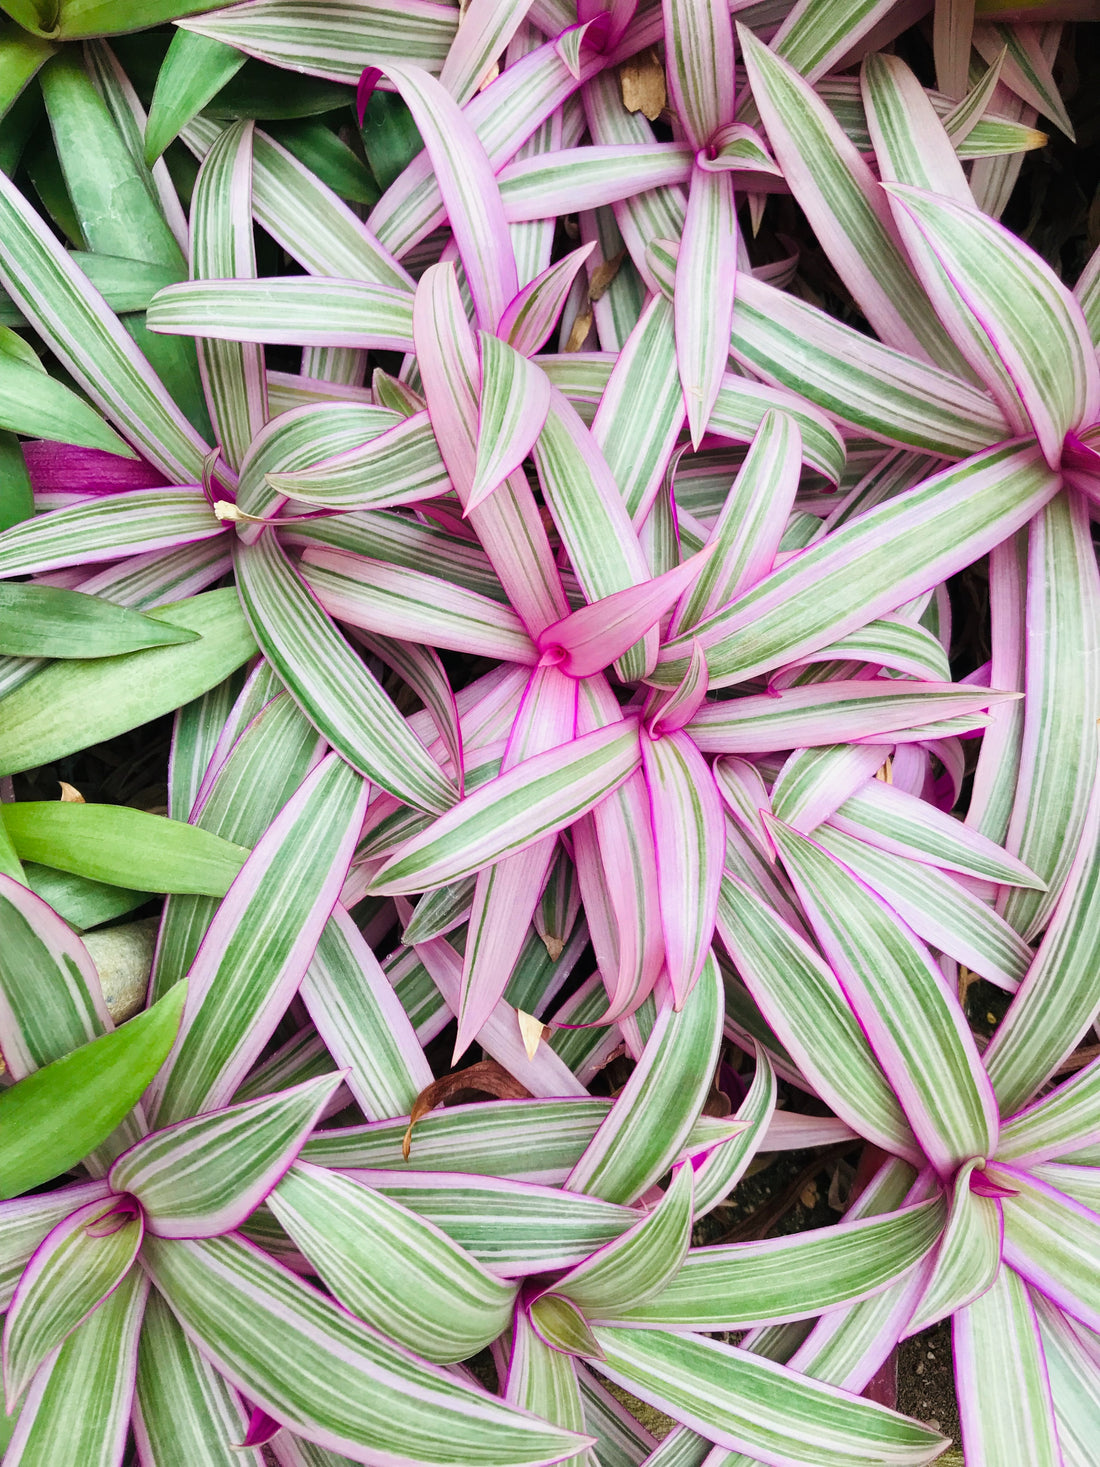 Overhead image of pink and green tradescantias